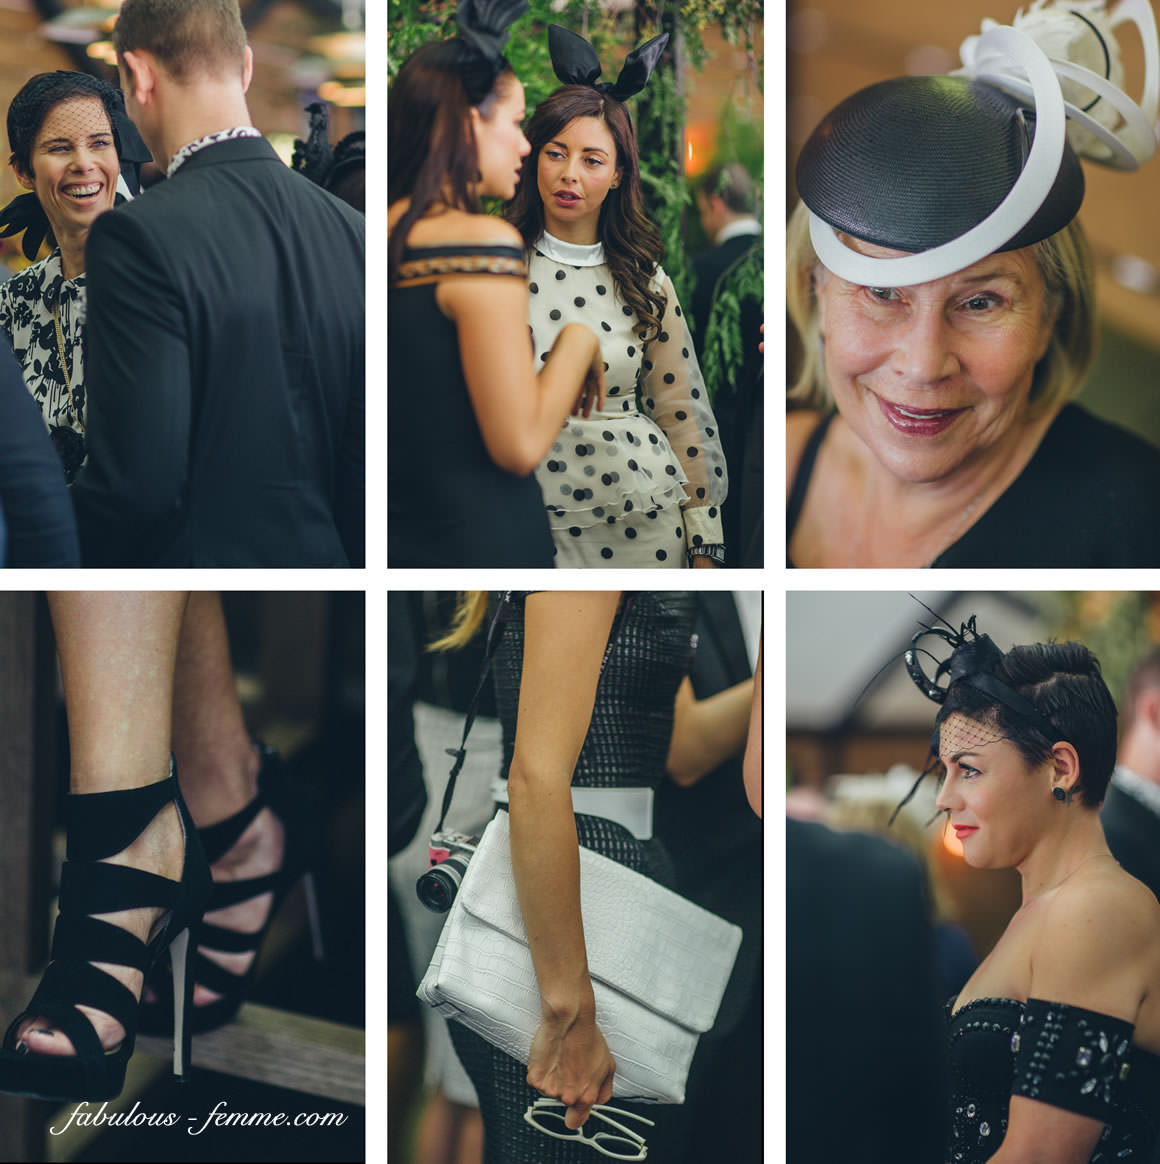 candid event photography melbourne